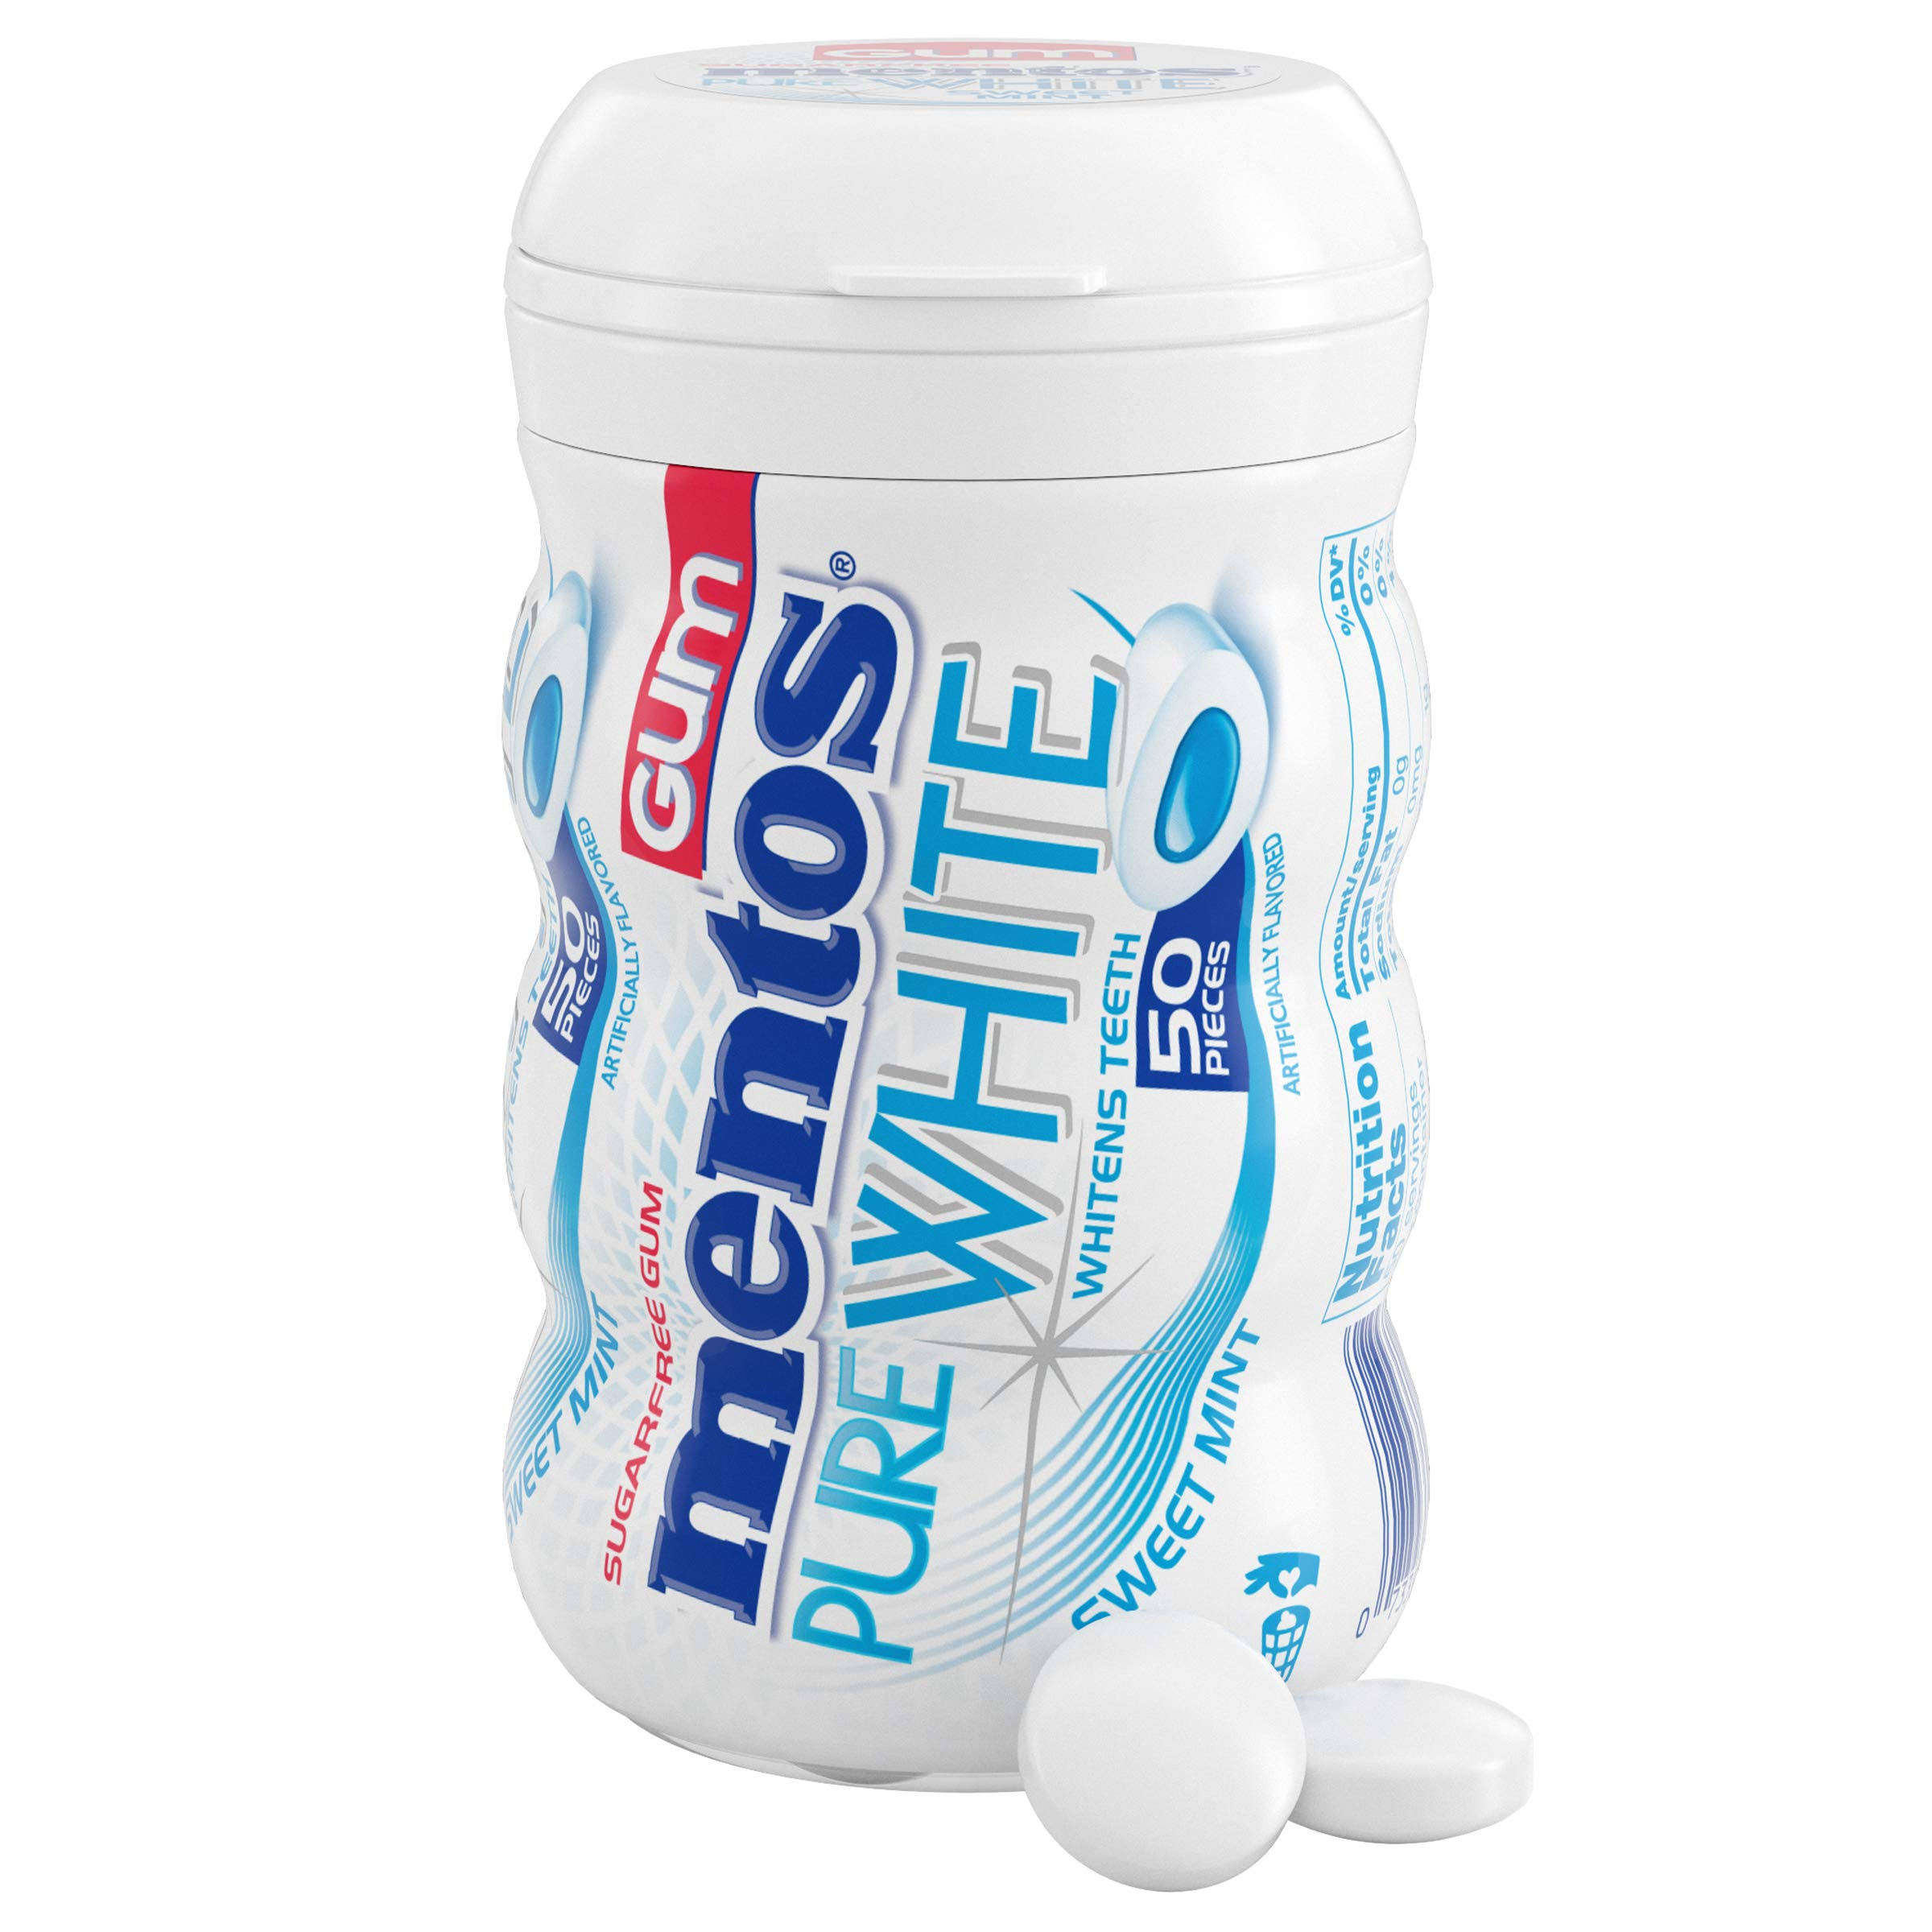 Mentos Pure White Sweet Mint Chewing Gum - 50ct